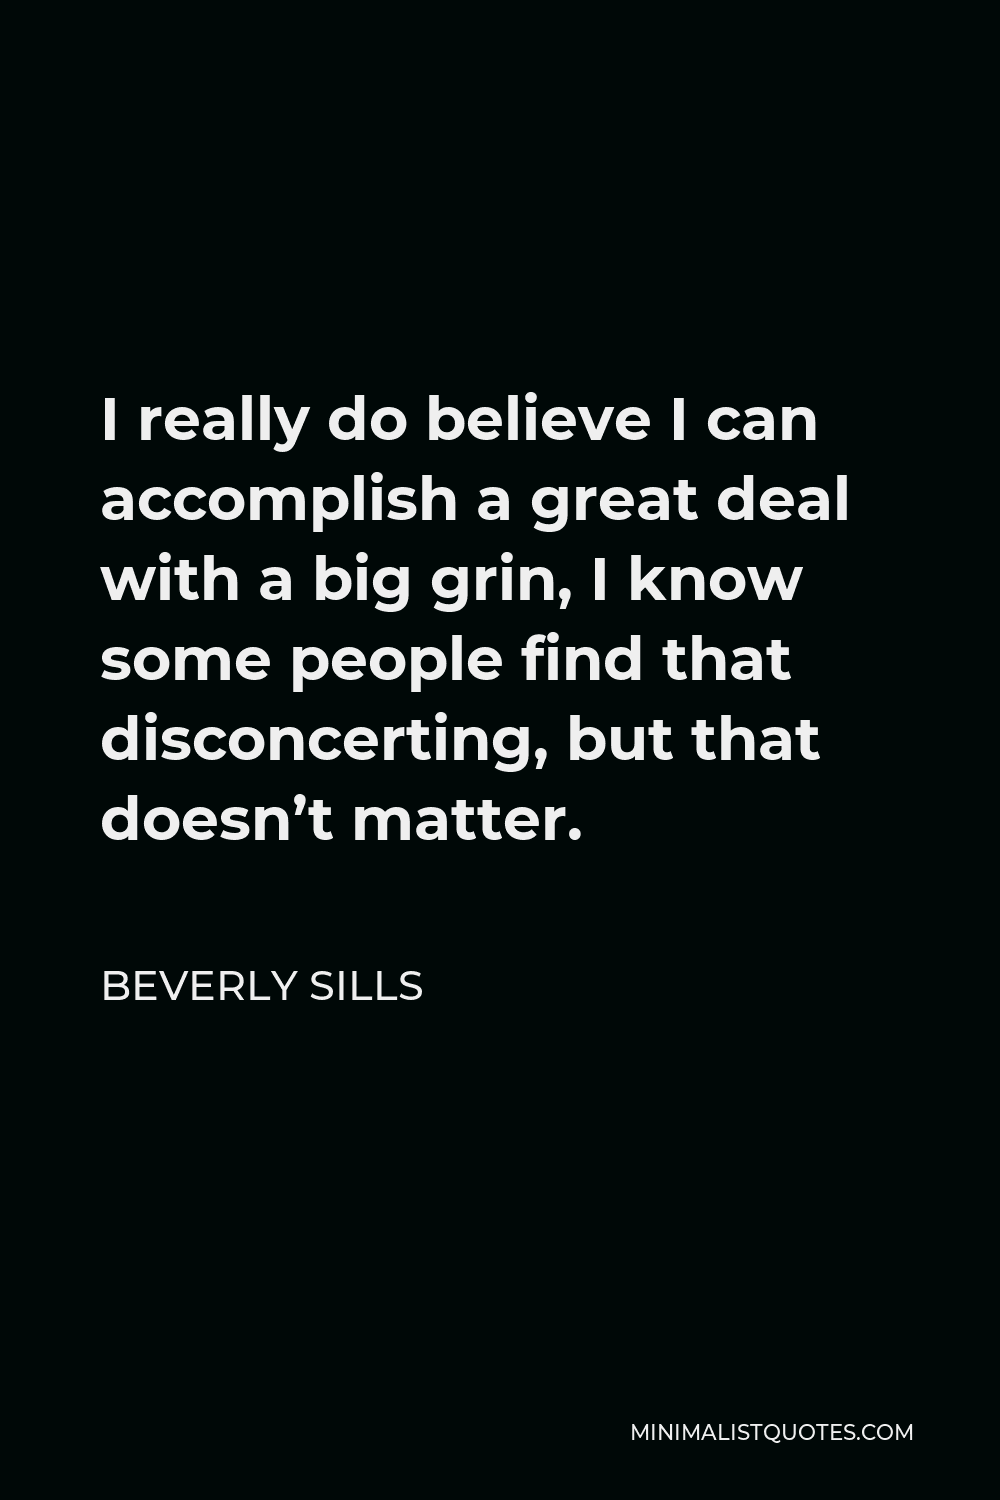 Beverly Sills Quote - I really do believe I can accomplish a great deal with a big grin, I know some people find that disconcerting, but that doesn’t matter.